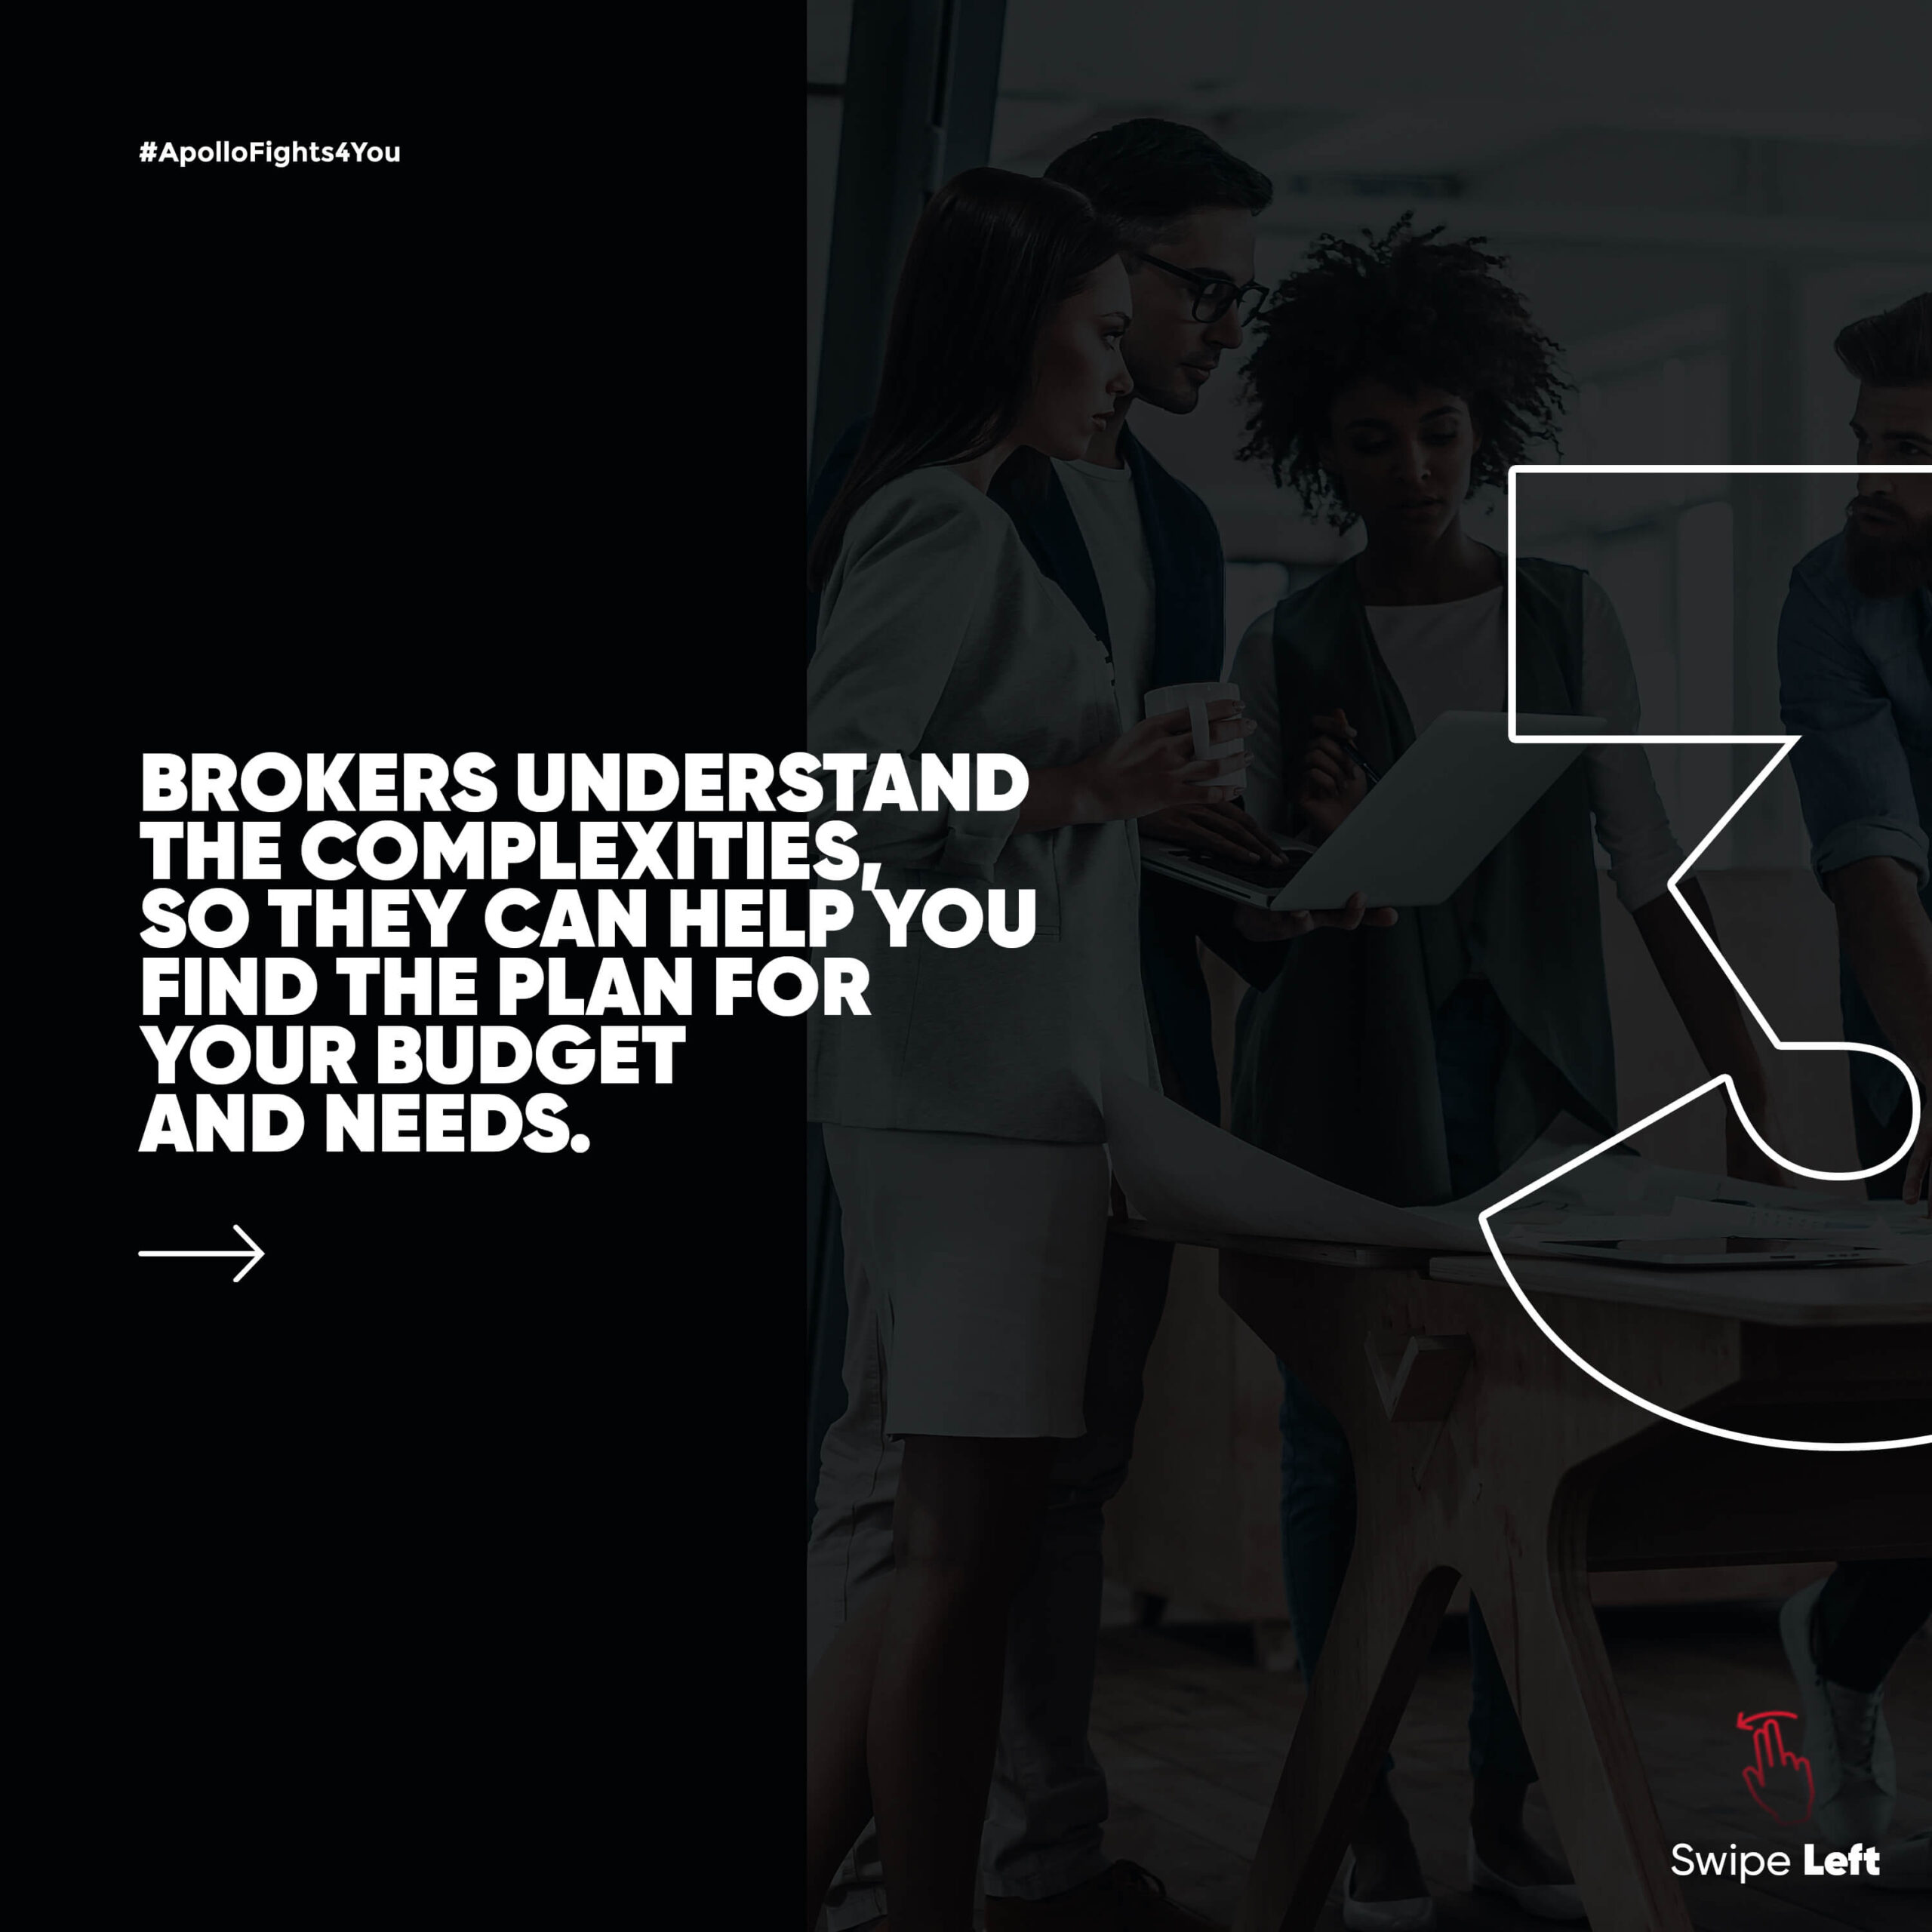 Should I Use A Broker To Get Health Insurance